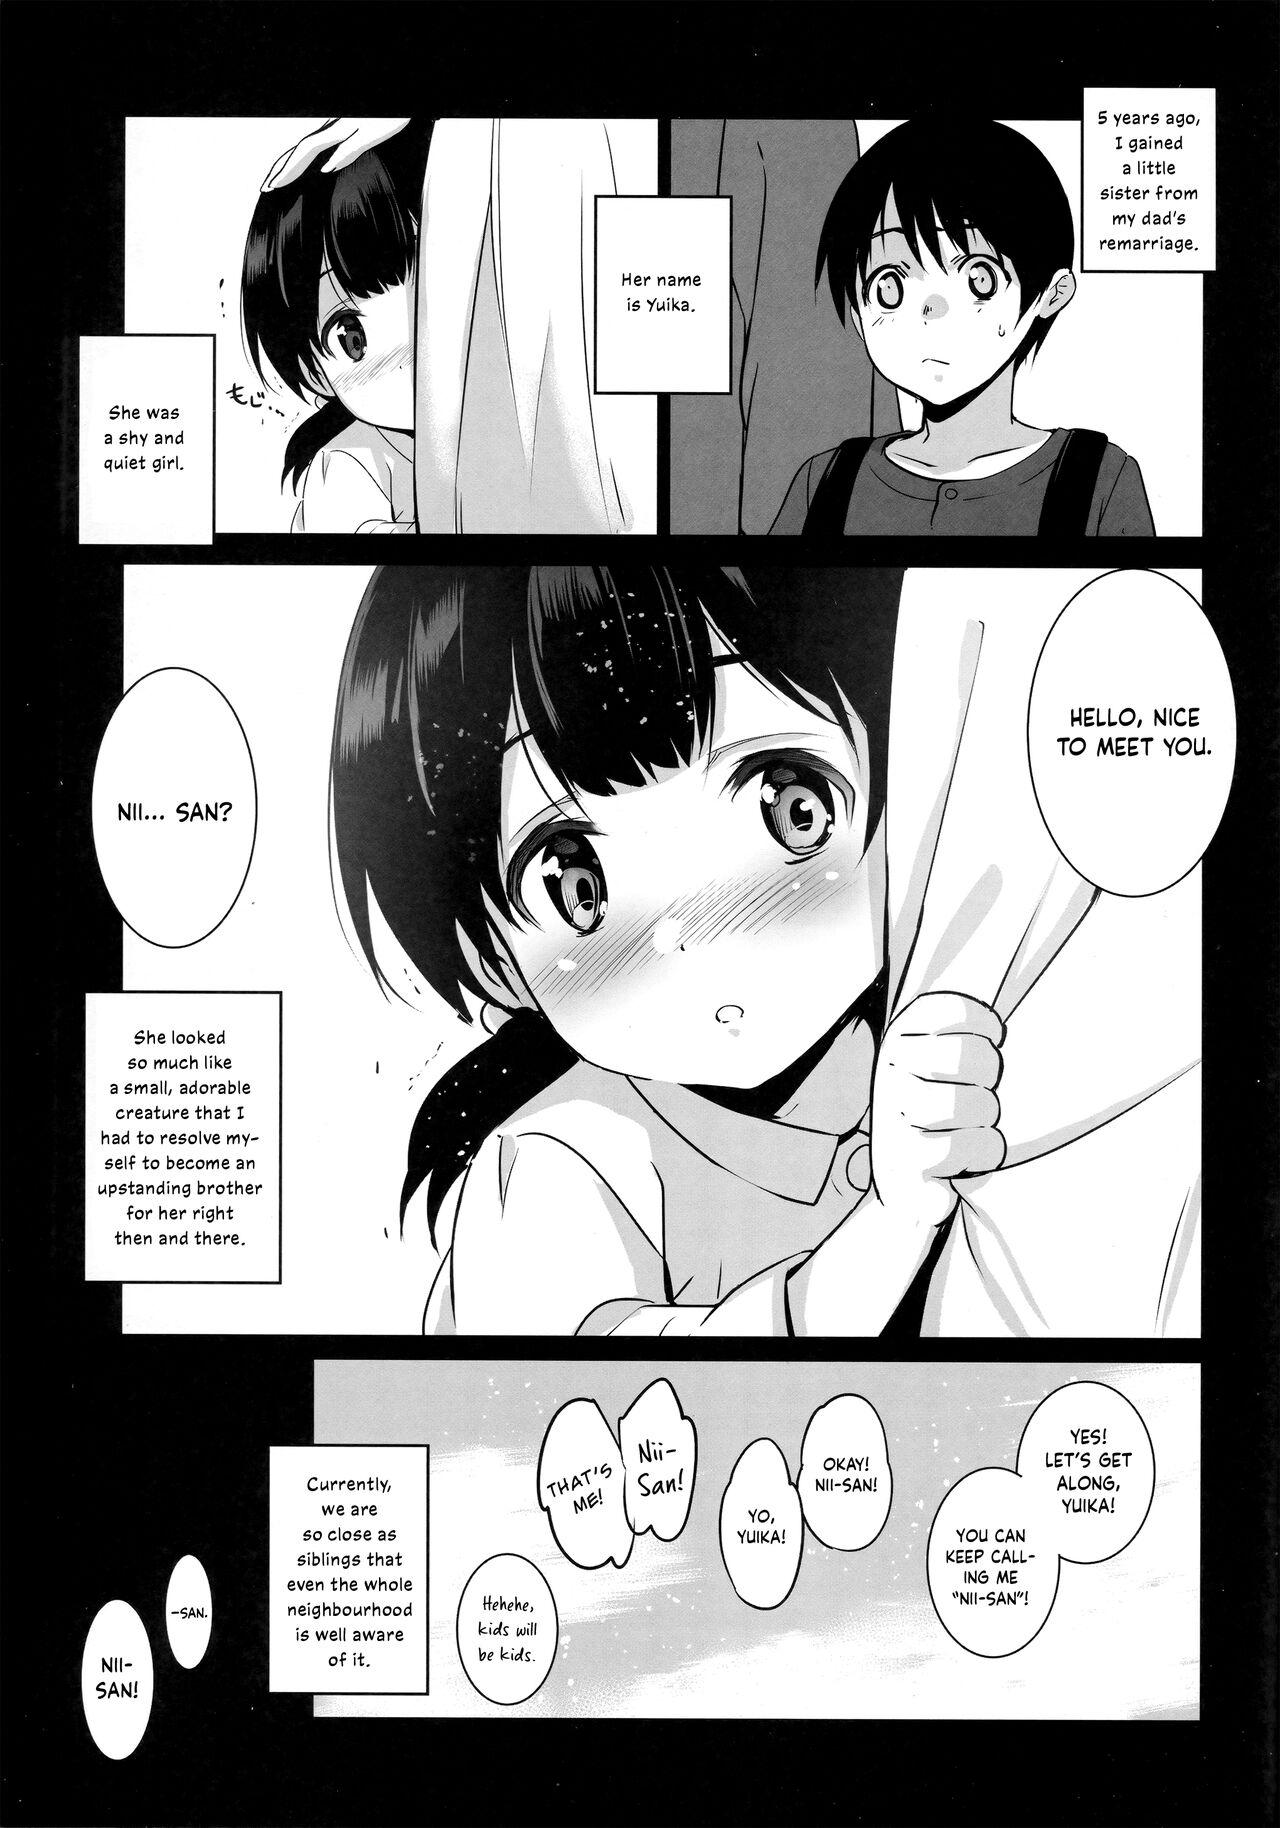 Clothed Imouto ga Boku ni Taninboux o Okutte kuru | My Little Sister Is Sending Me Her Videos Of Getting Fucked By Strangers - Original Sloppy Blow Job - Page 2